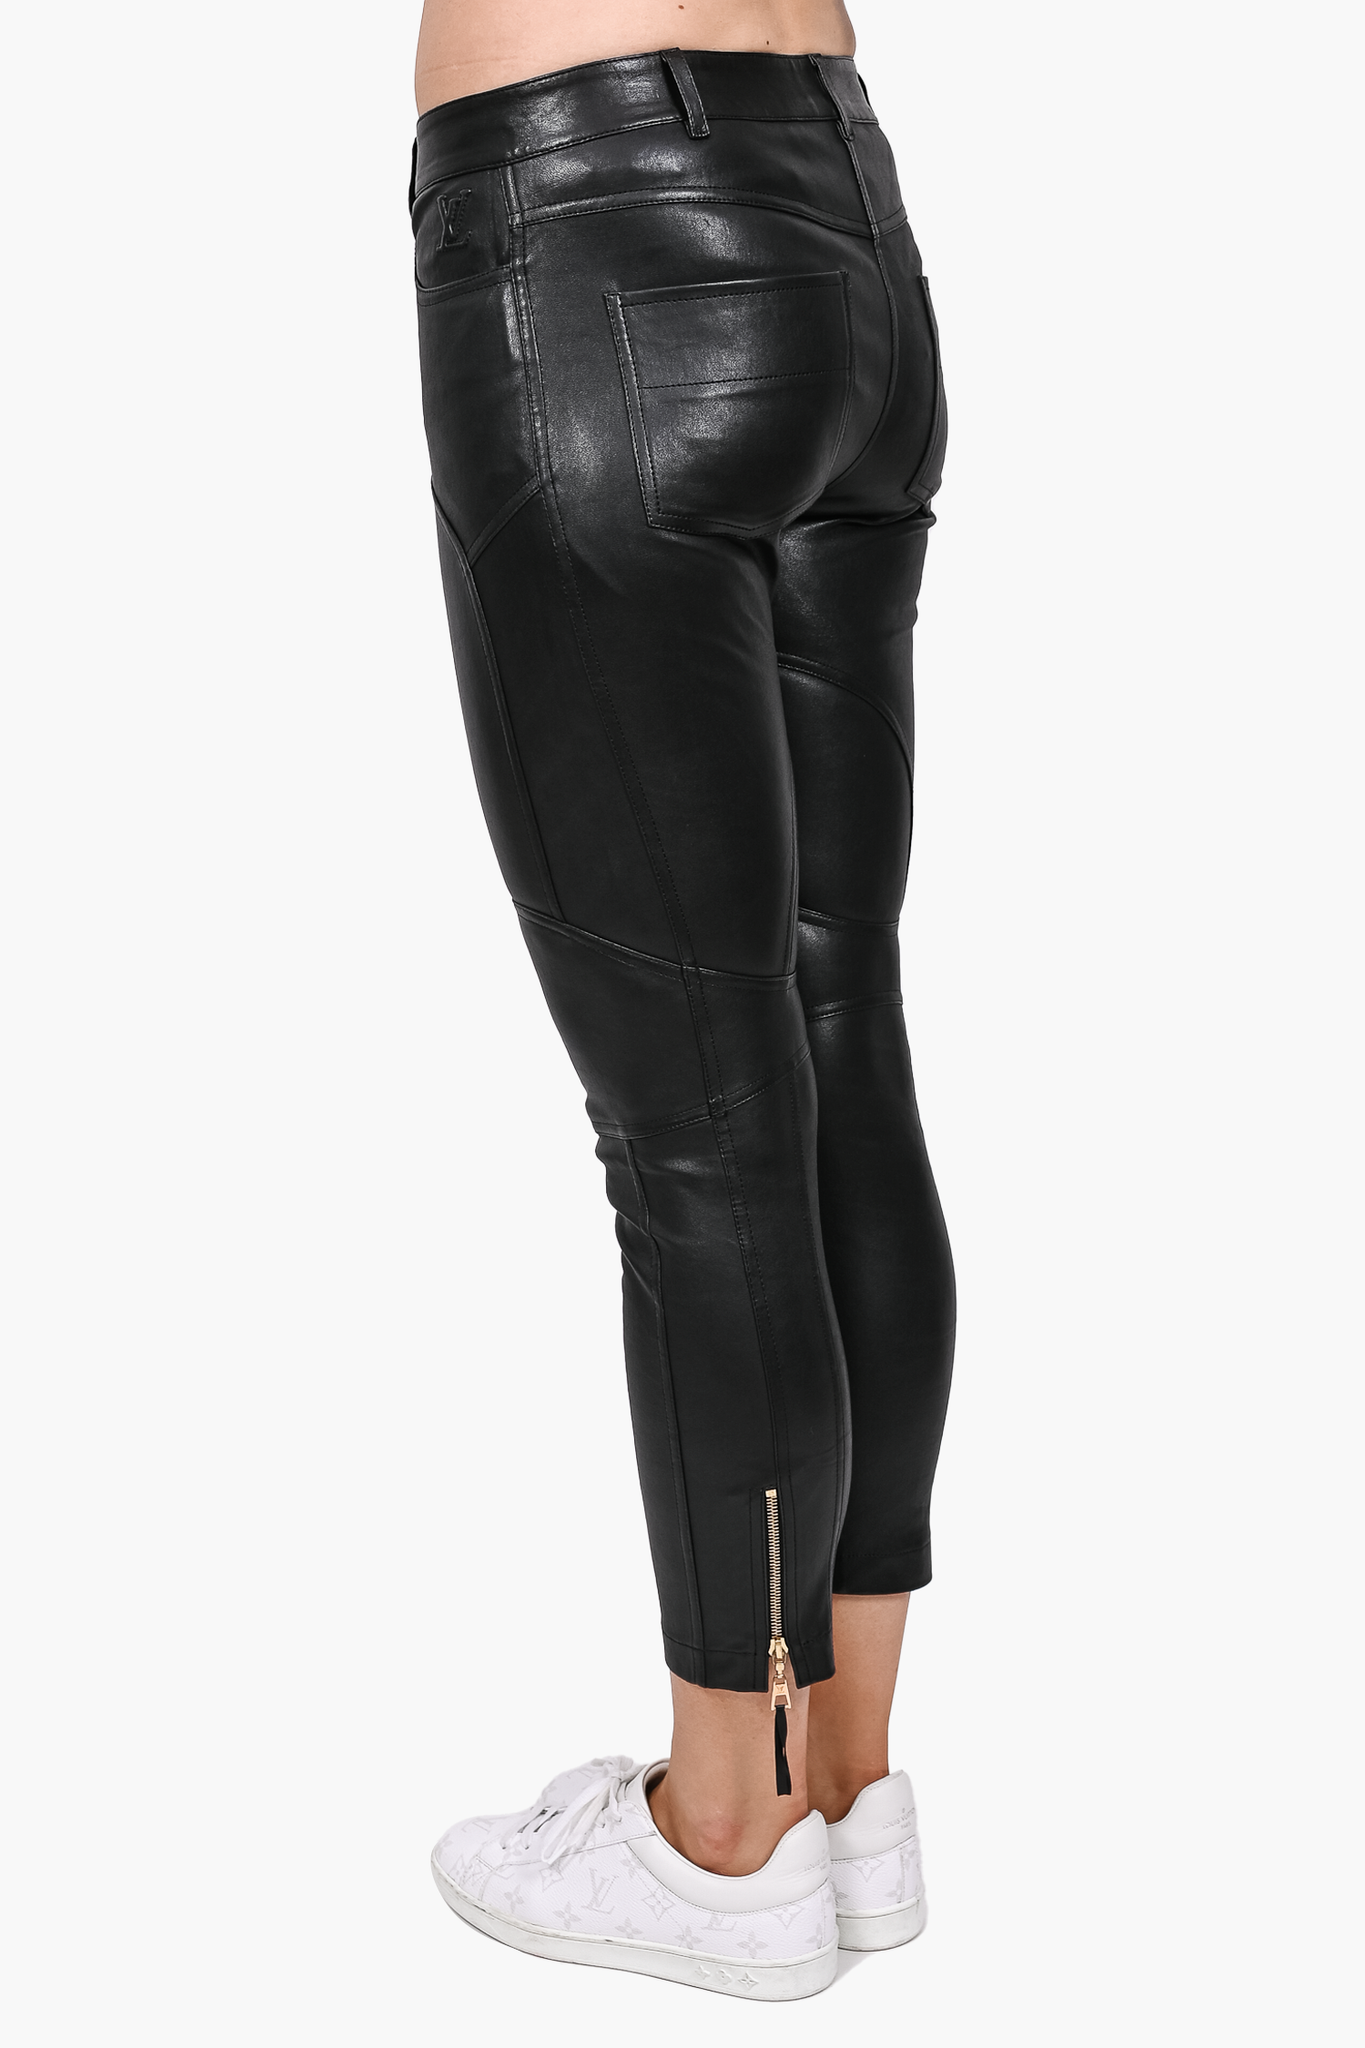 LOUIS VUITTON Leather Jeggings Lambskin Ankle Zip Moto Pant in